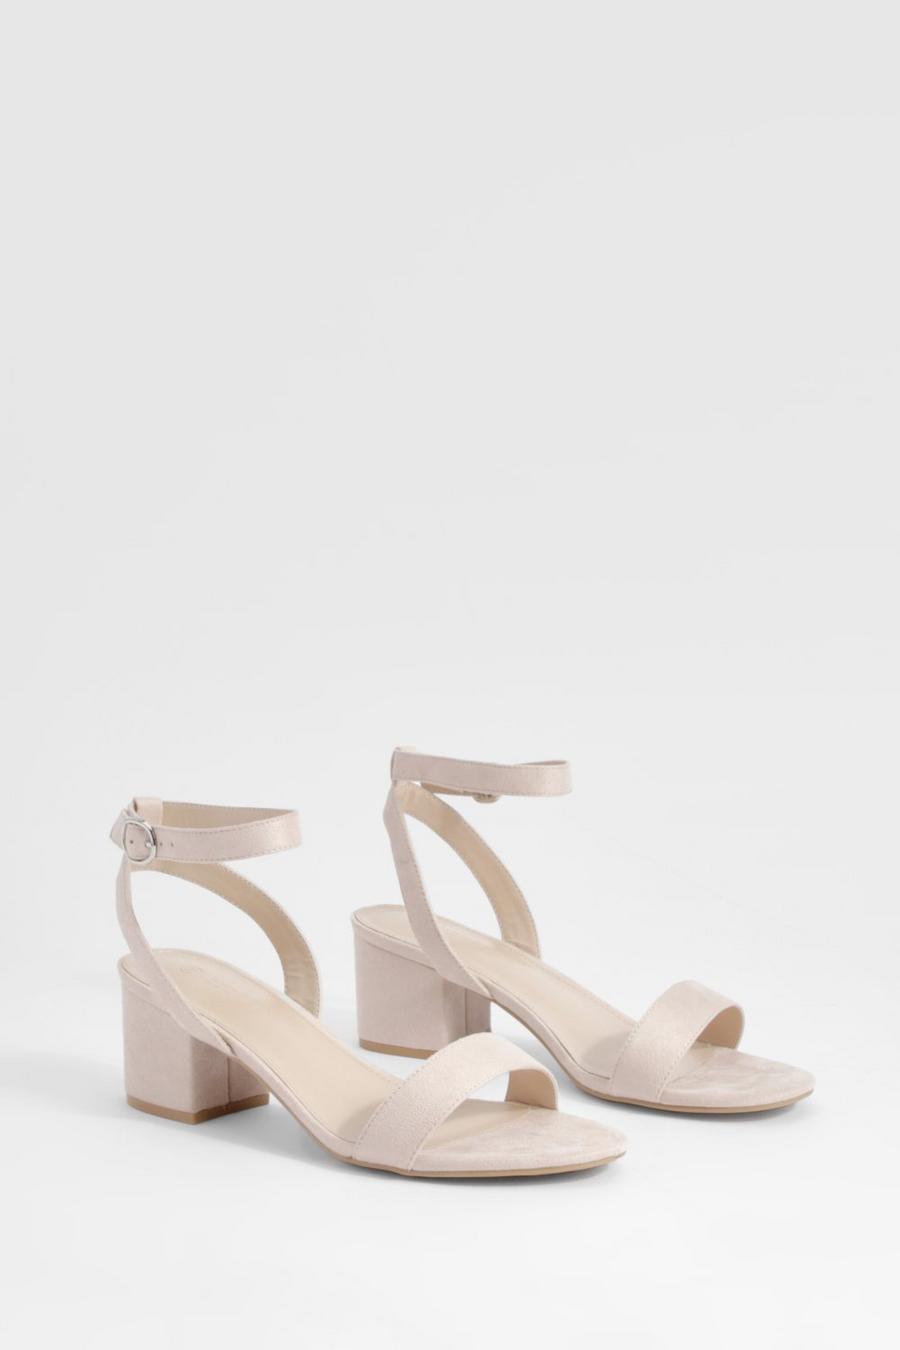 Blush rosa Low Block Barely There Heels 